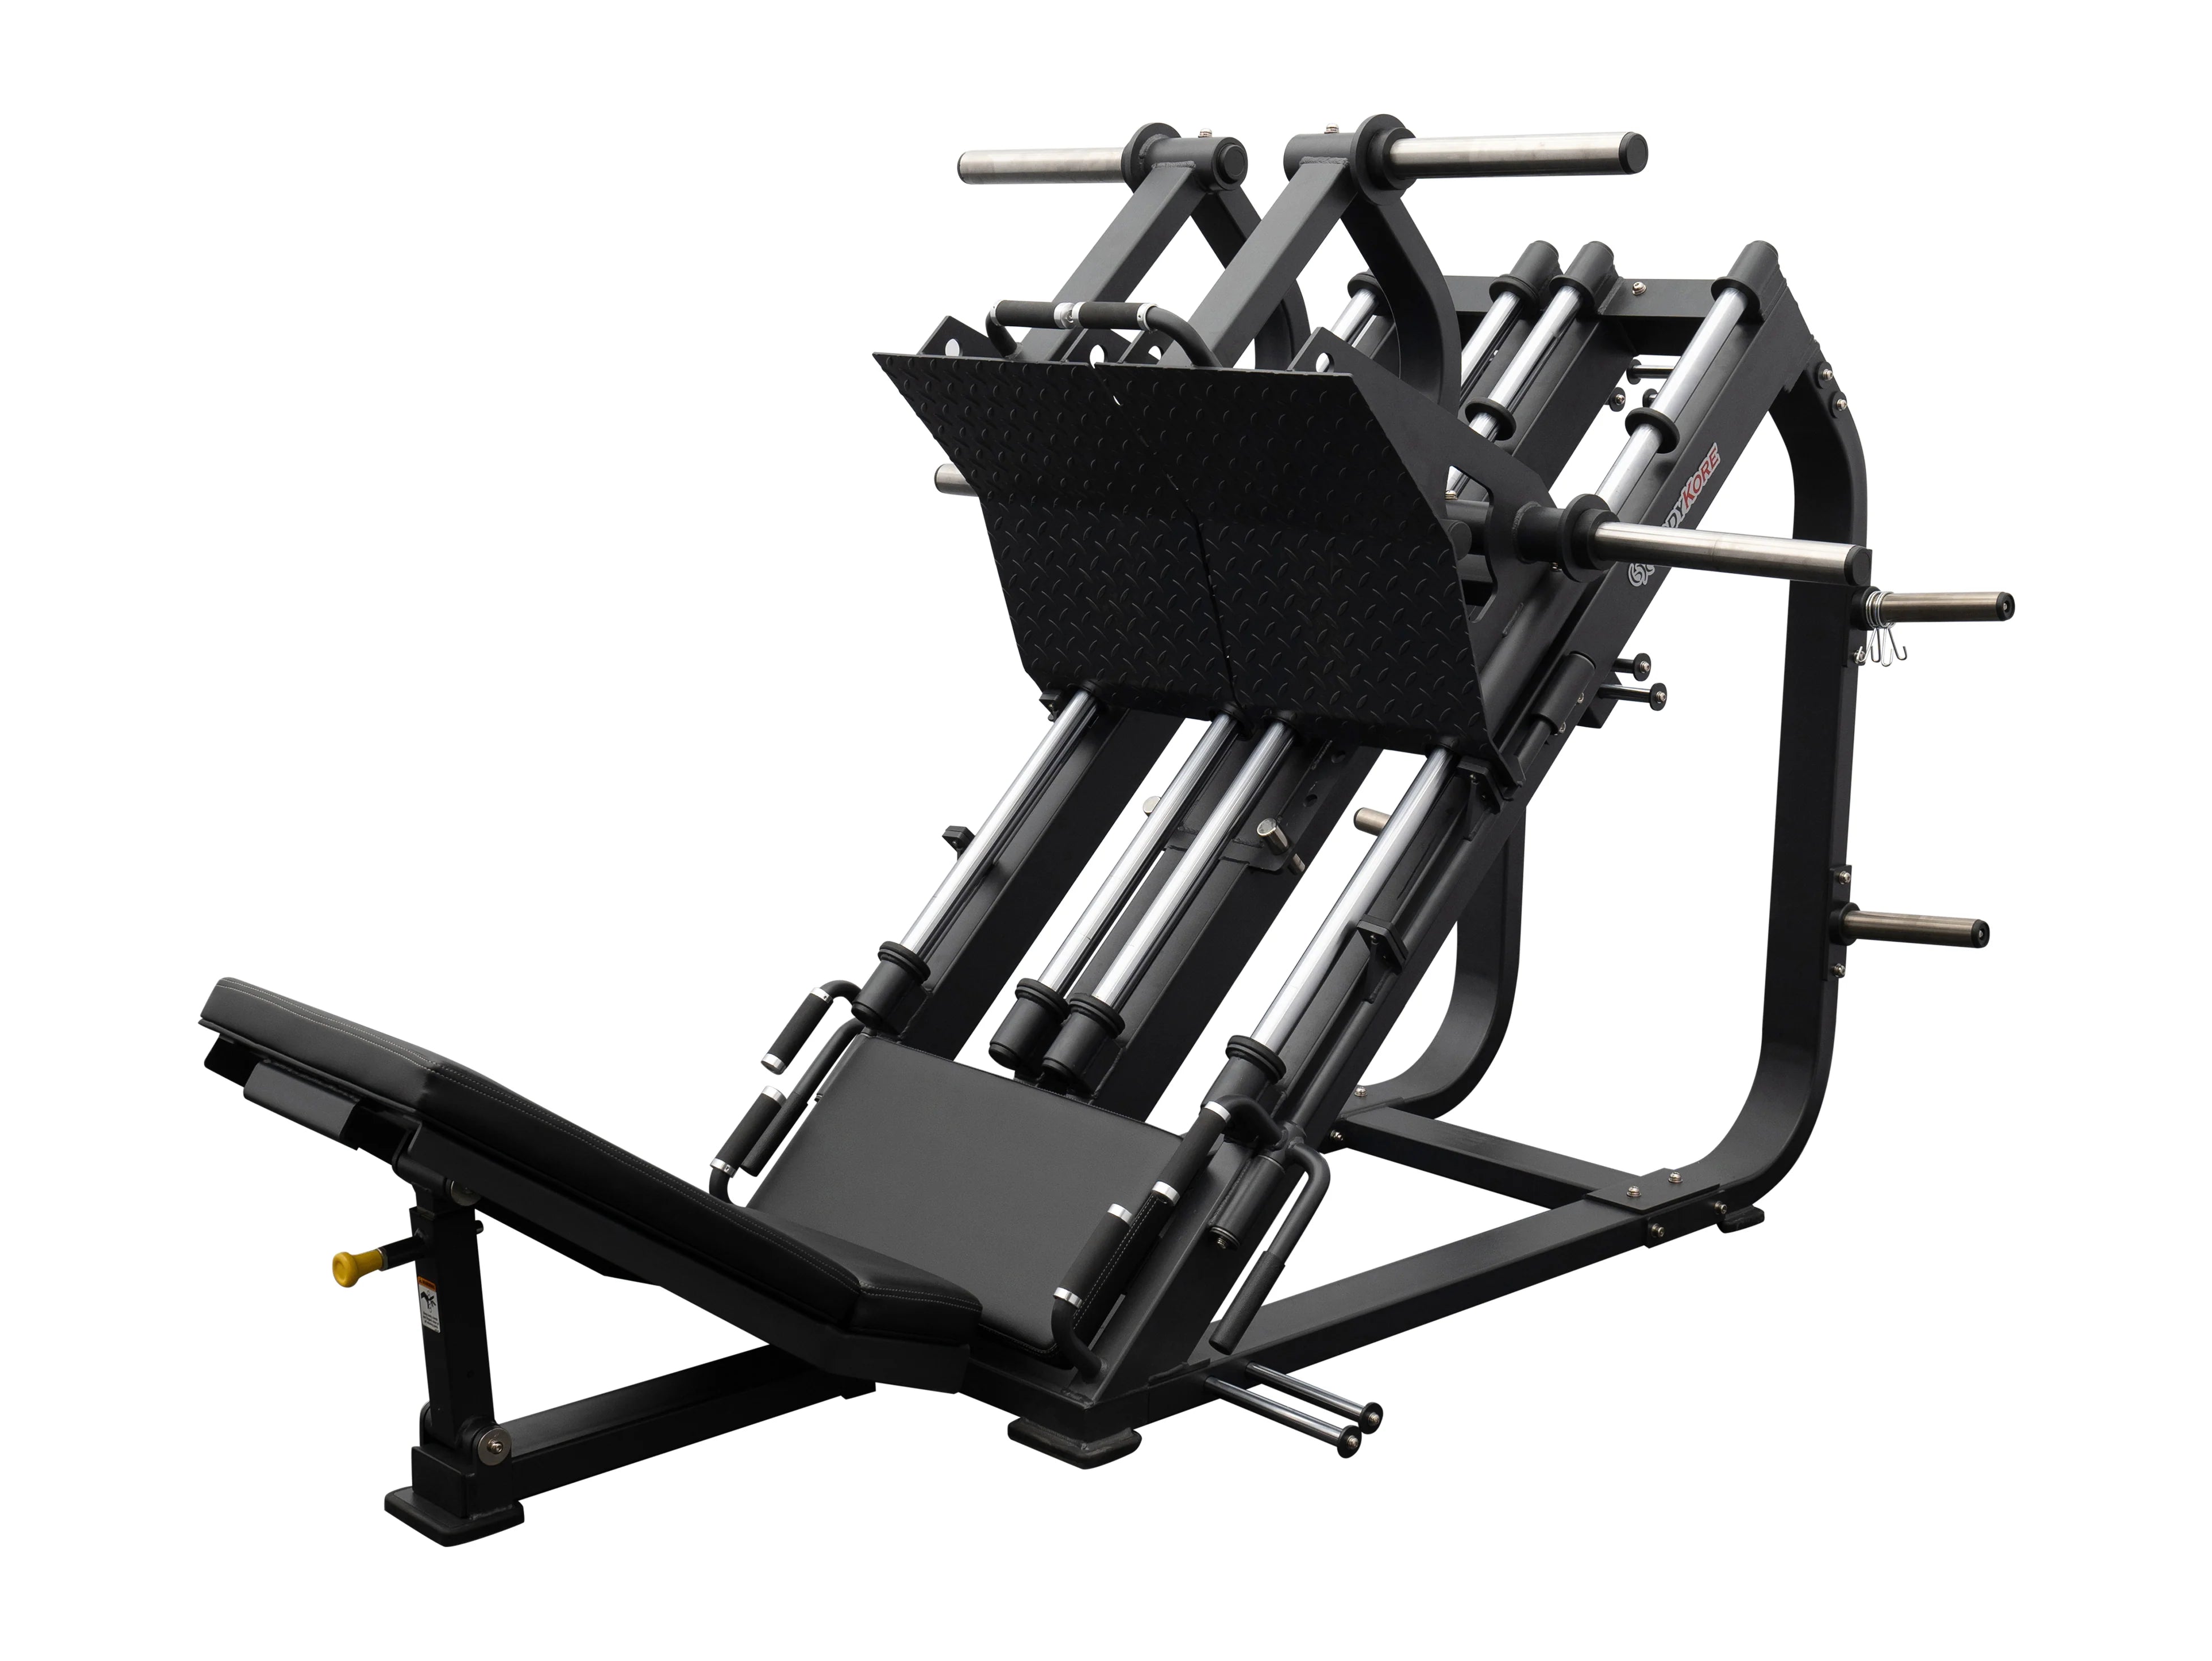 Does foot placement make a difference on the horizontal leg press